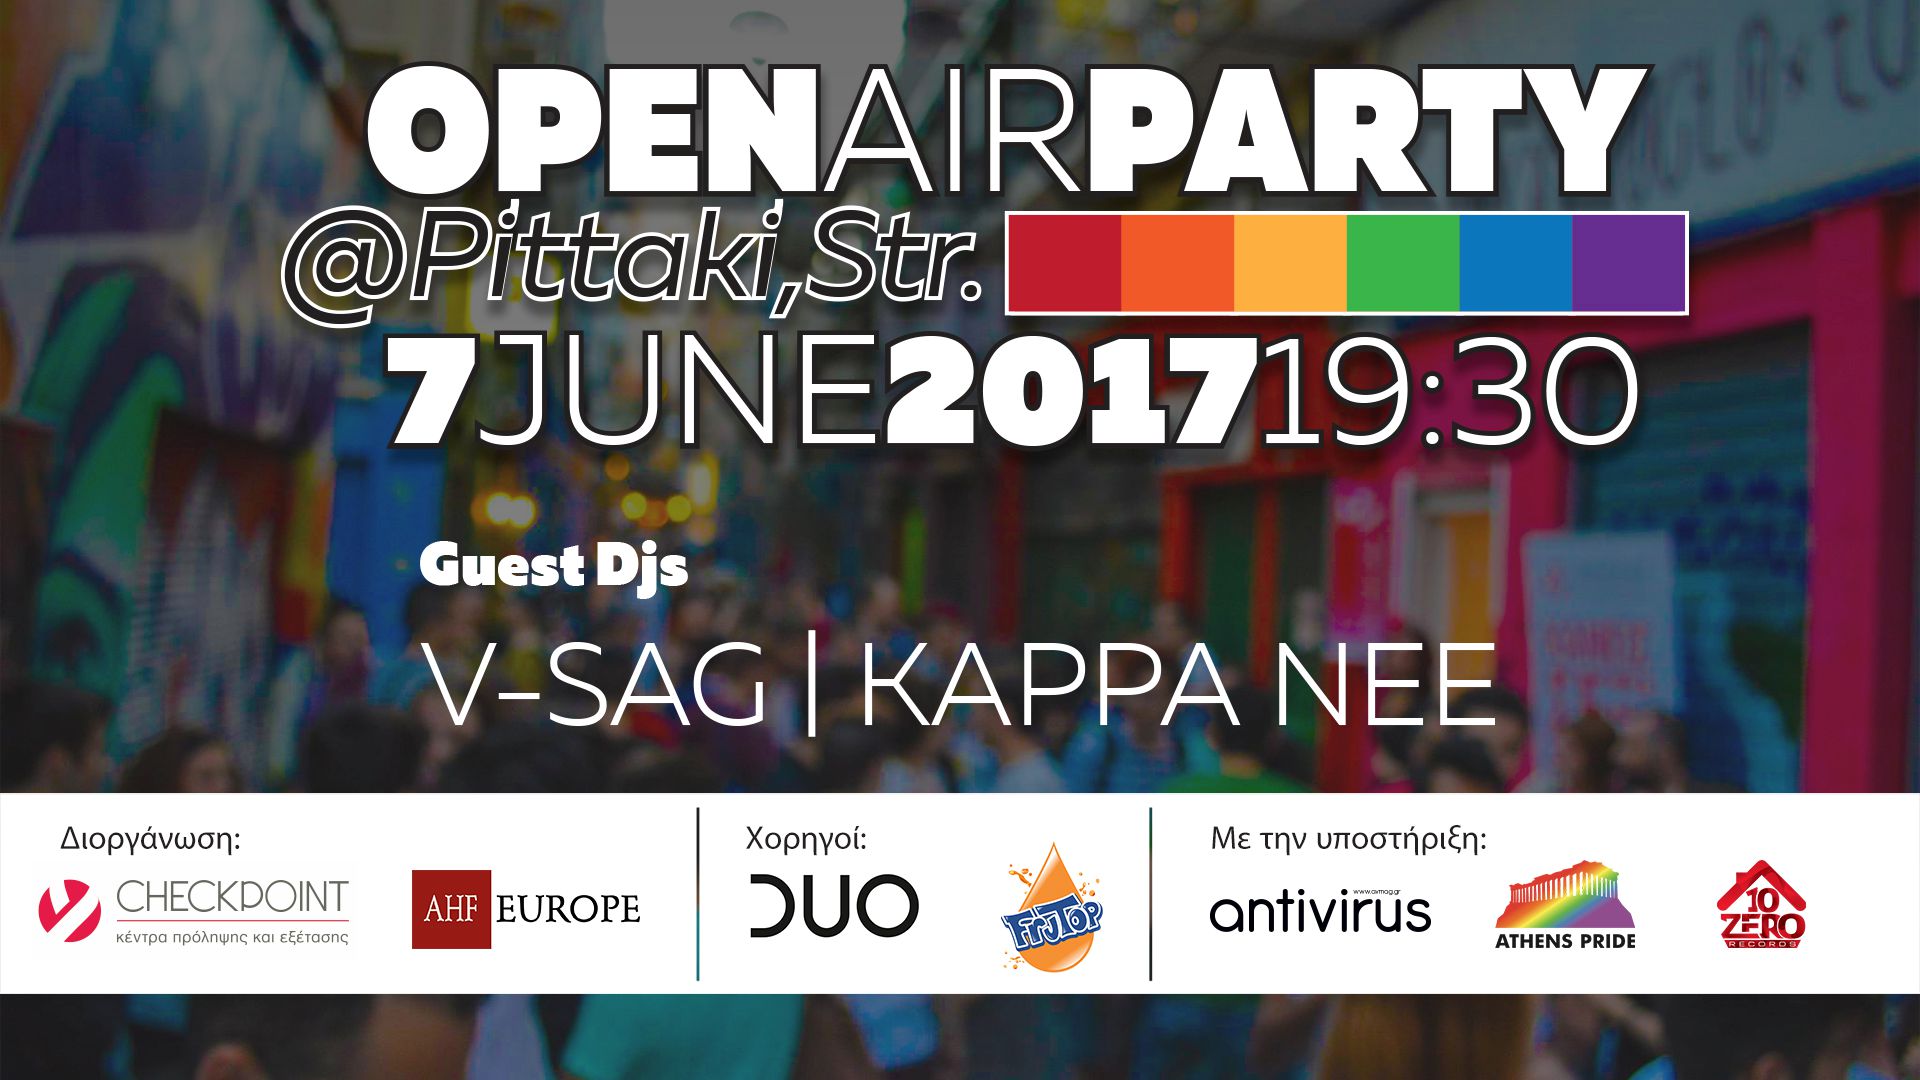 Featured image for “PITTAKI STREET OPEN AIR PARTY @CHECKPOINT”